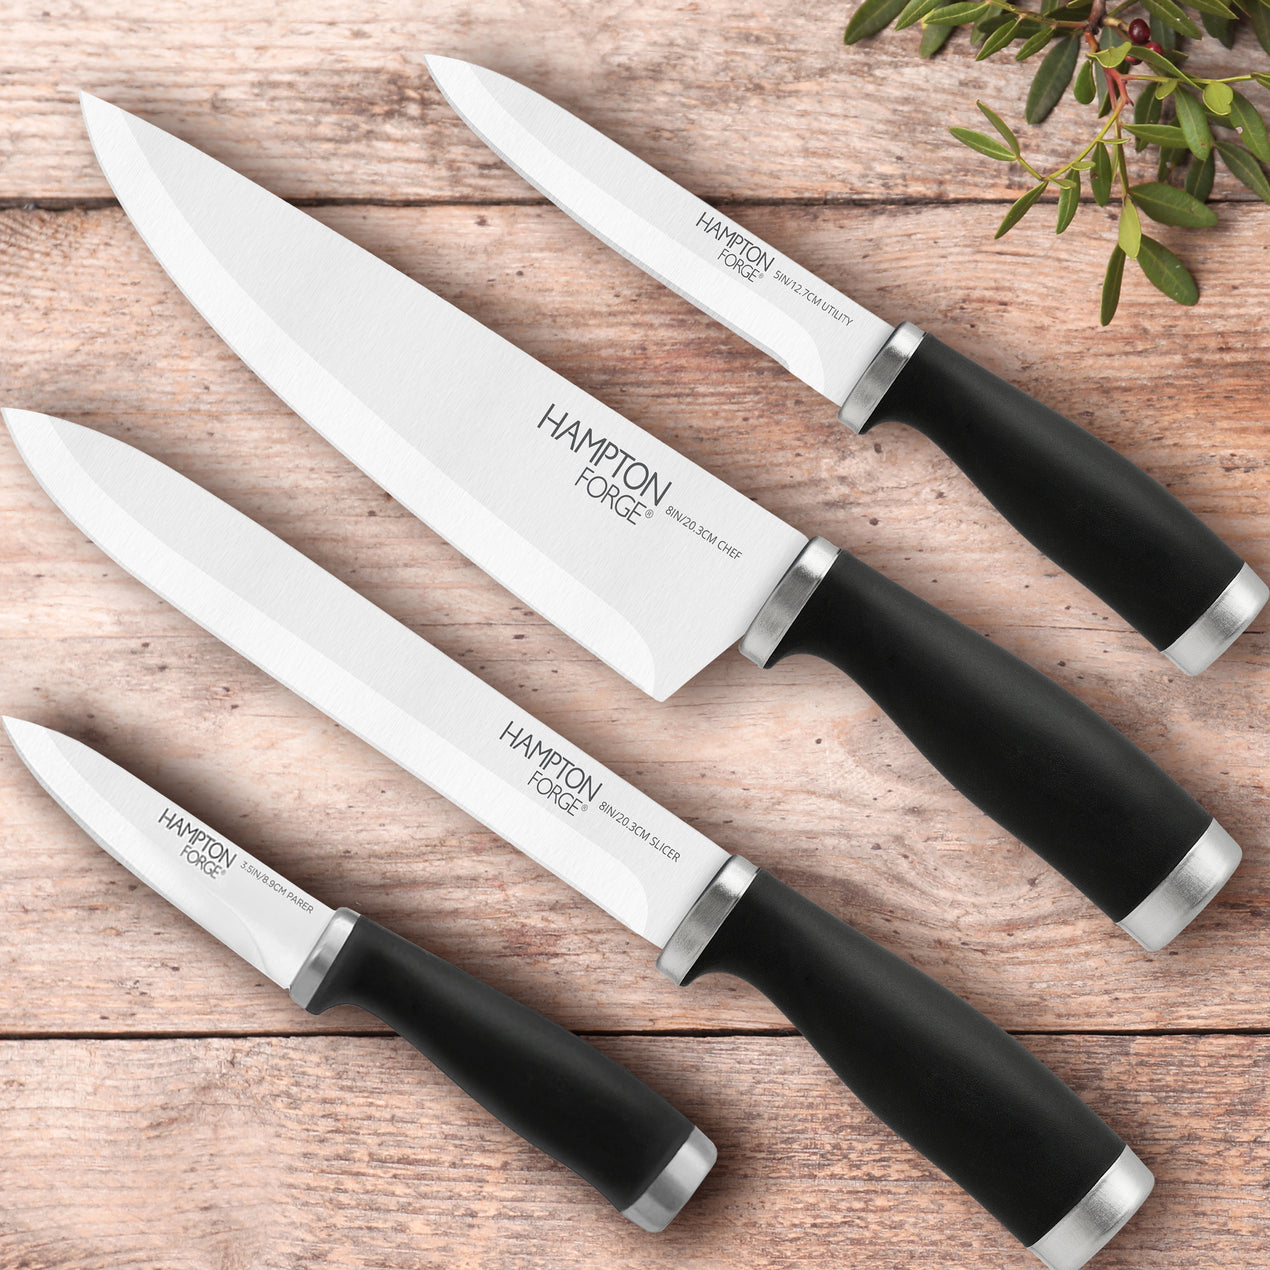 4-Piece Culinary Knife Set with Case